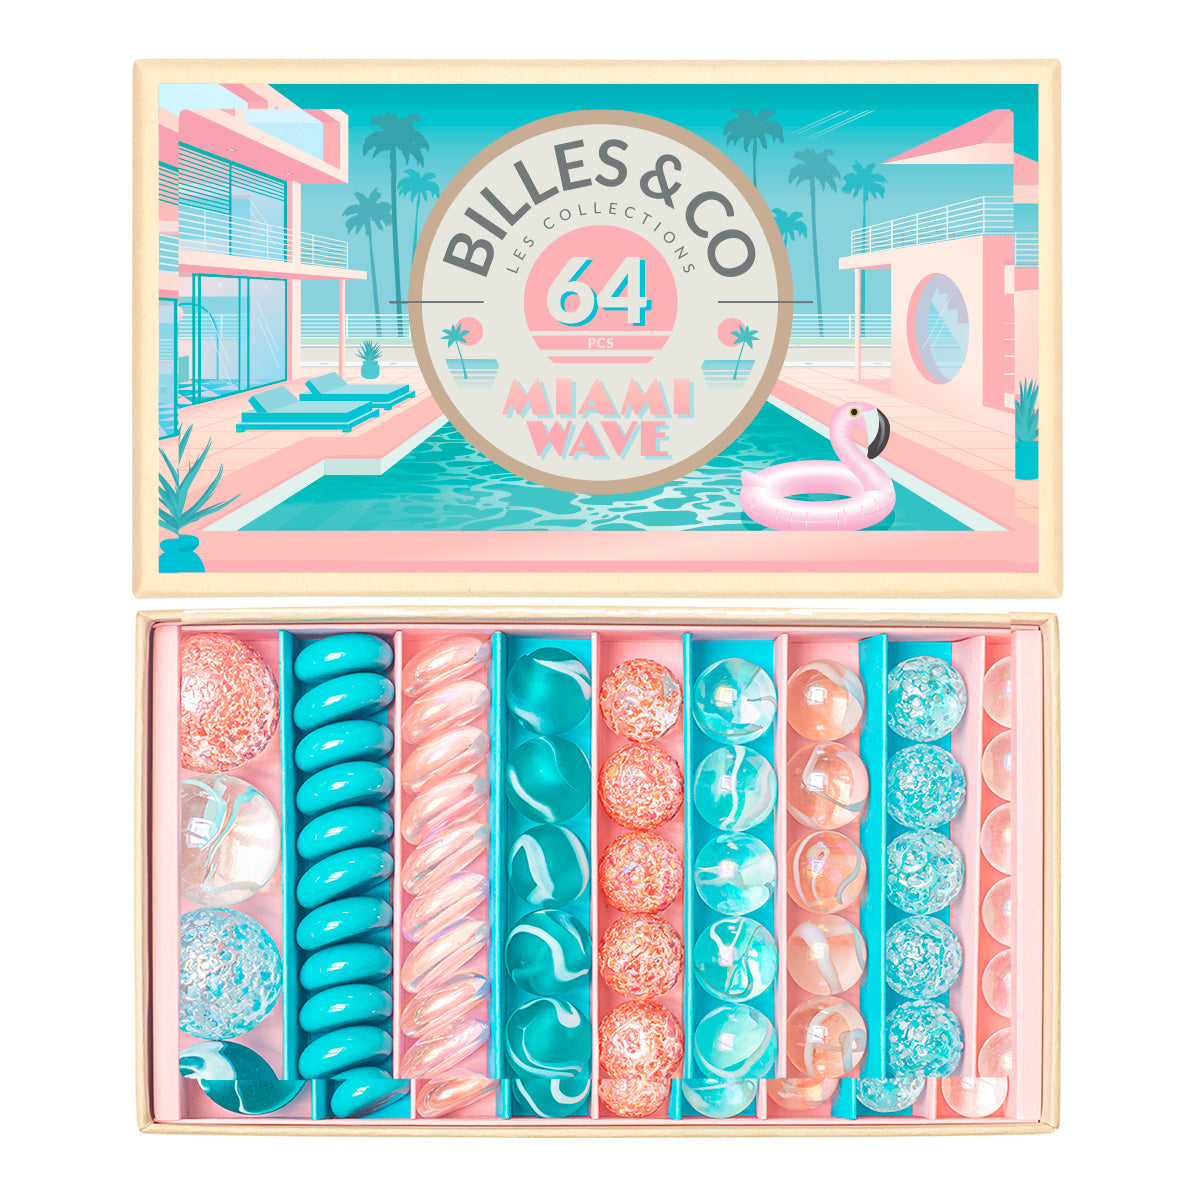 Miami Wave Marbles Box by Billes & Co